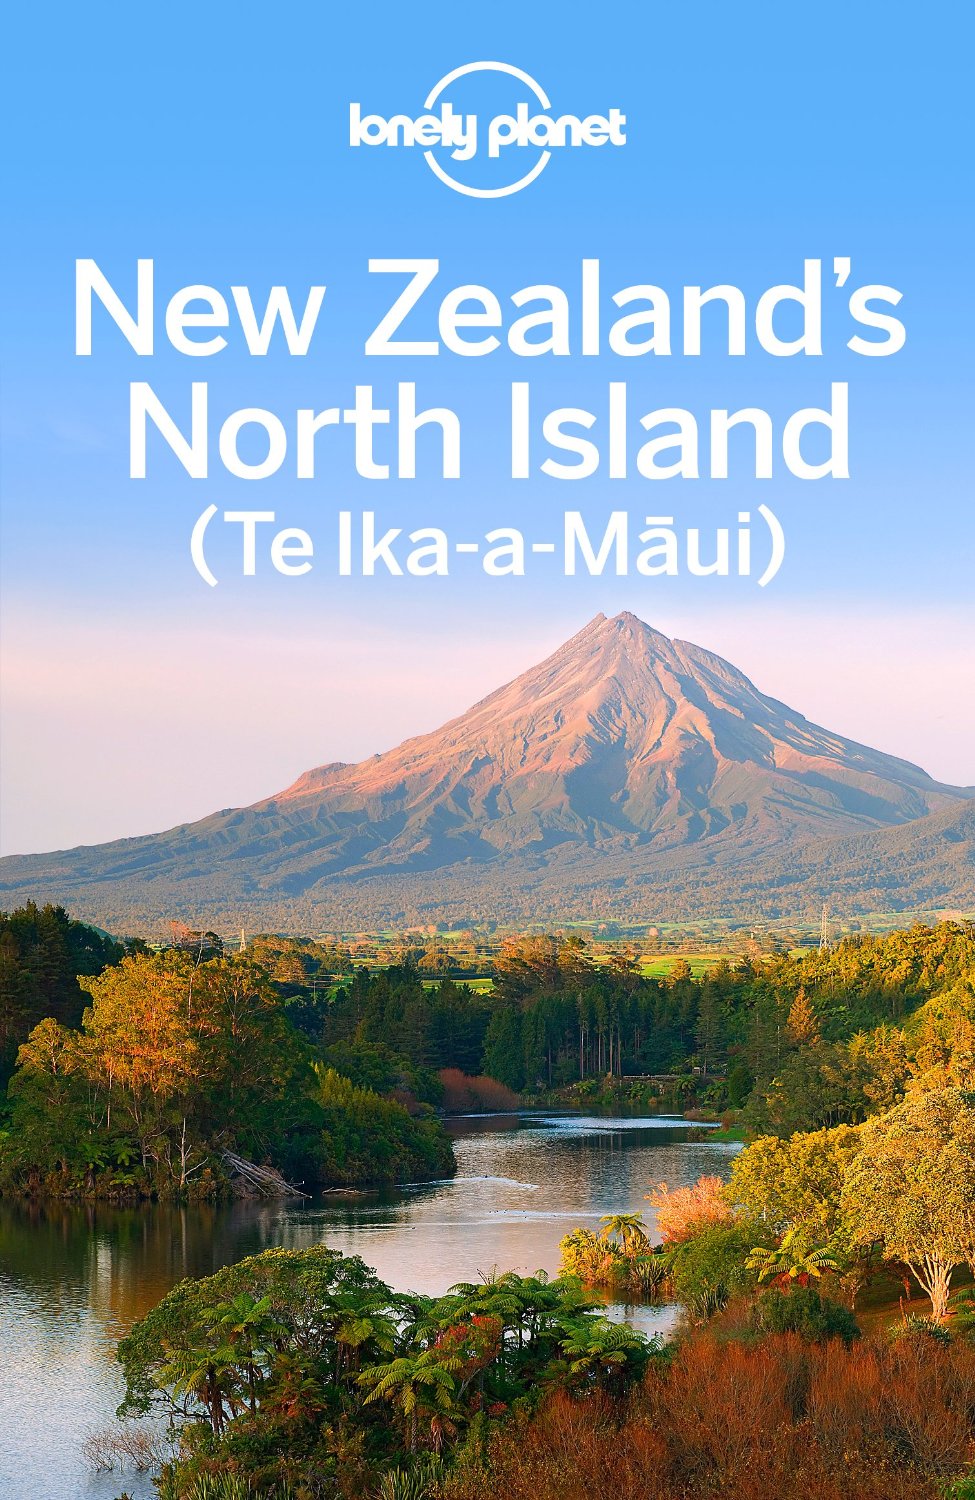 Lonely Planet - New Zealand's North Island